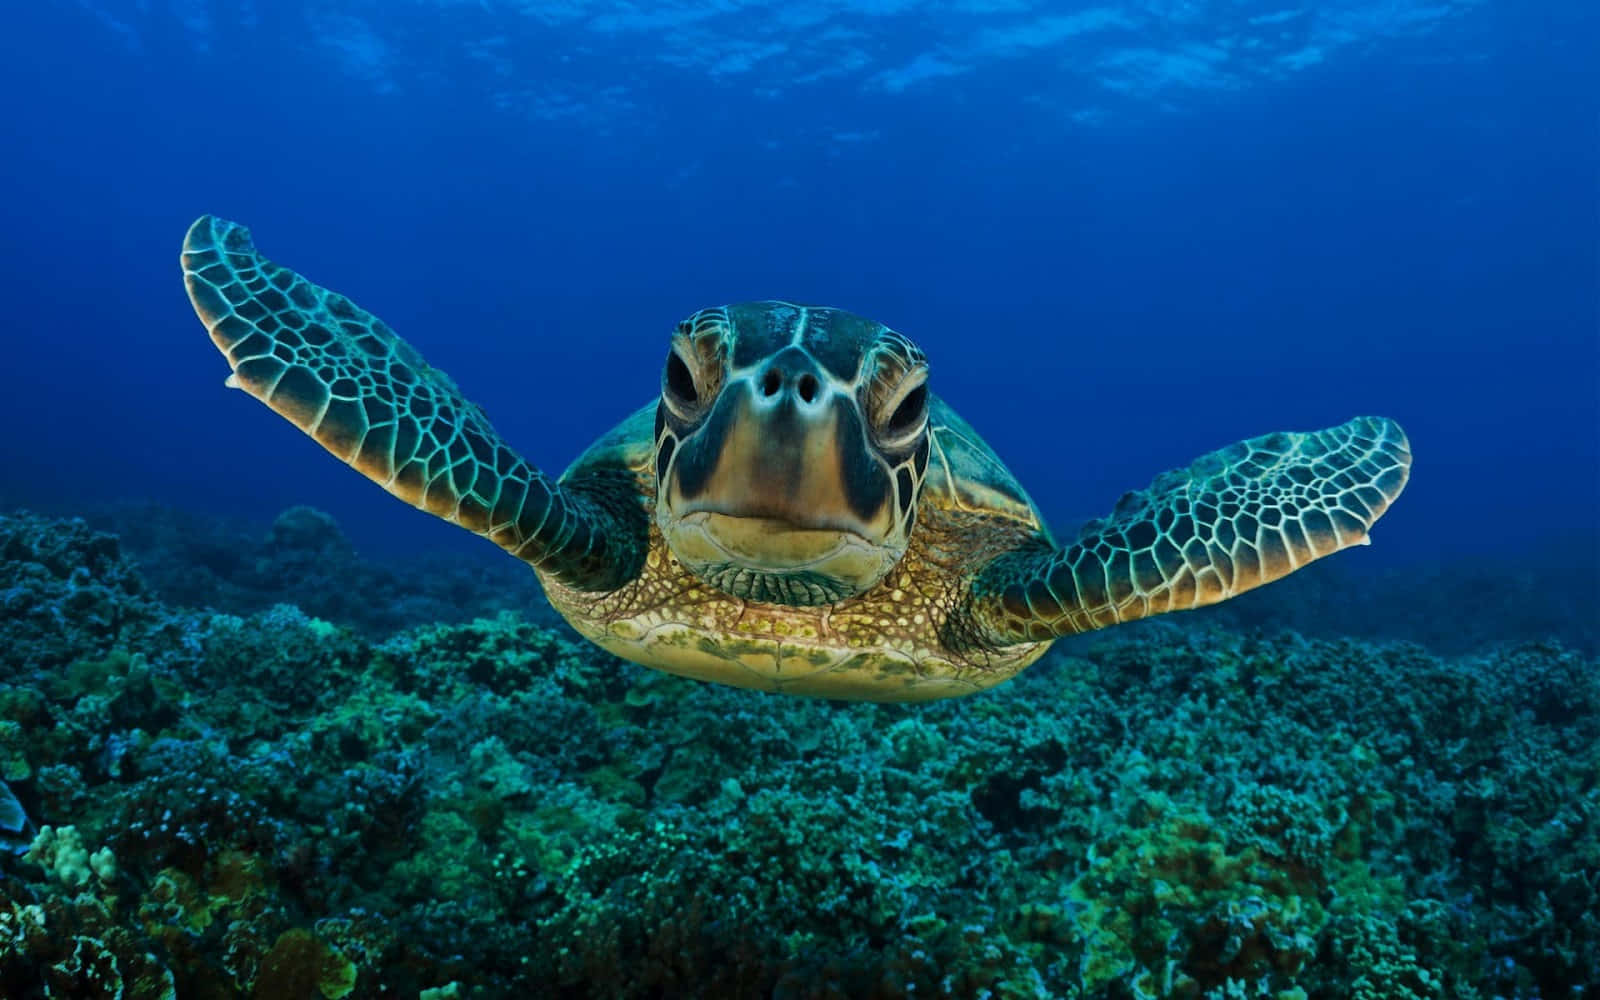 A sea turtle swims gracefully through the tranquil ocean